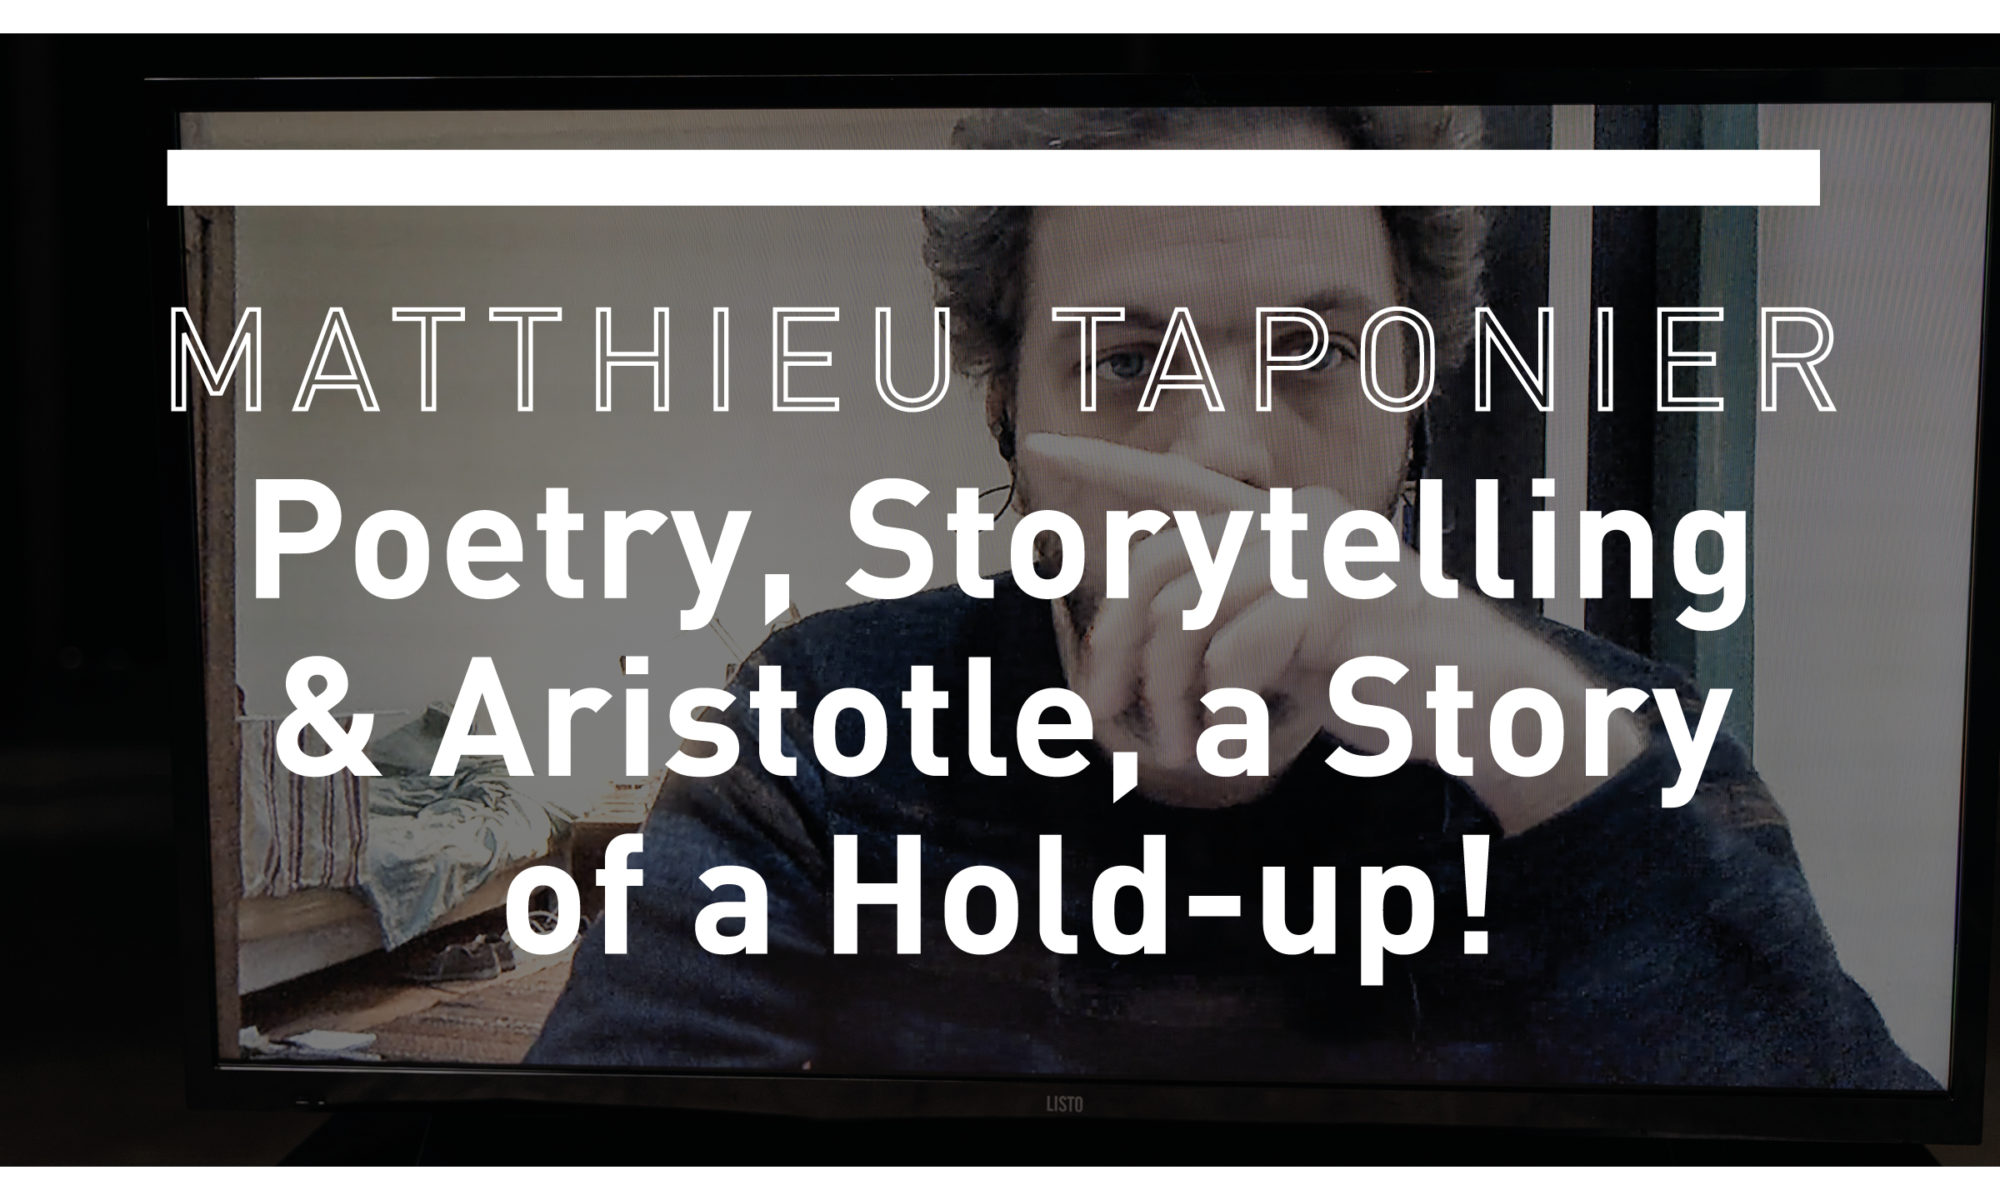 Poetry, Storytelling & Aristotle, a Story of a Hold-up! by Matthieu Taponier